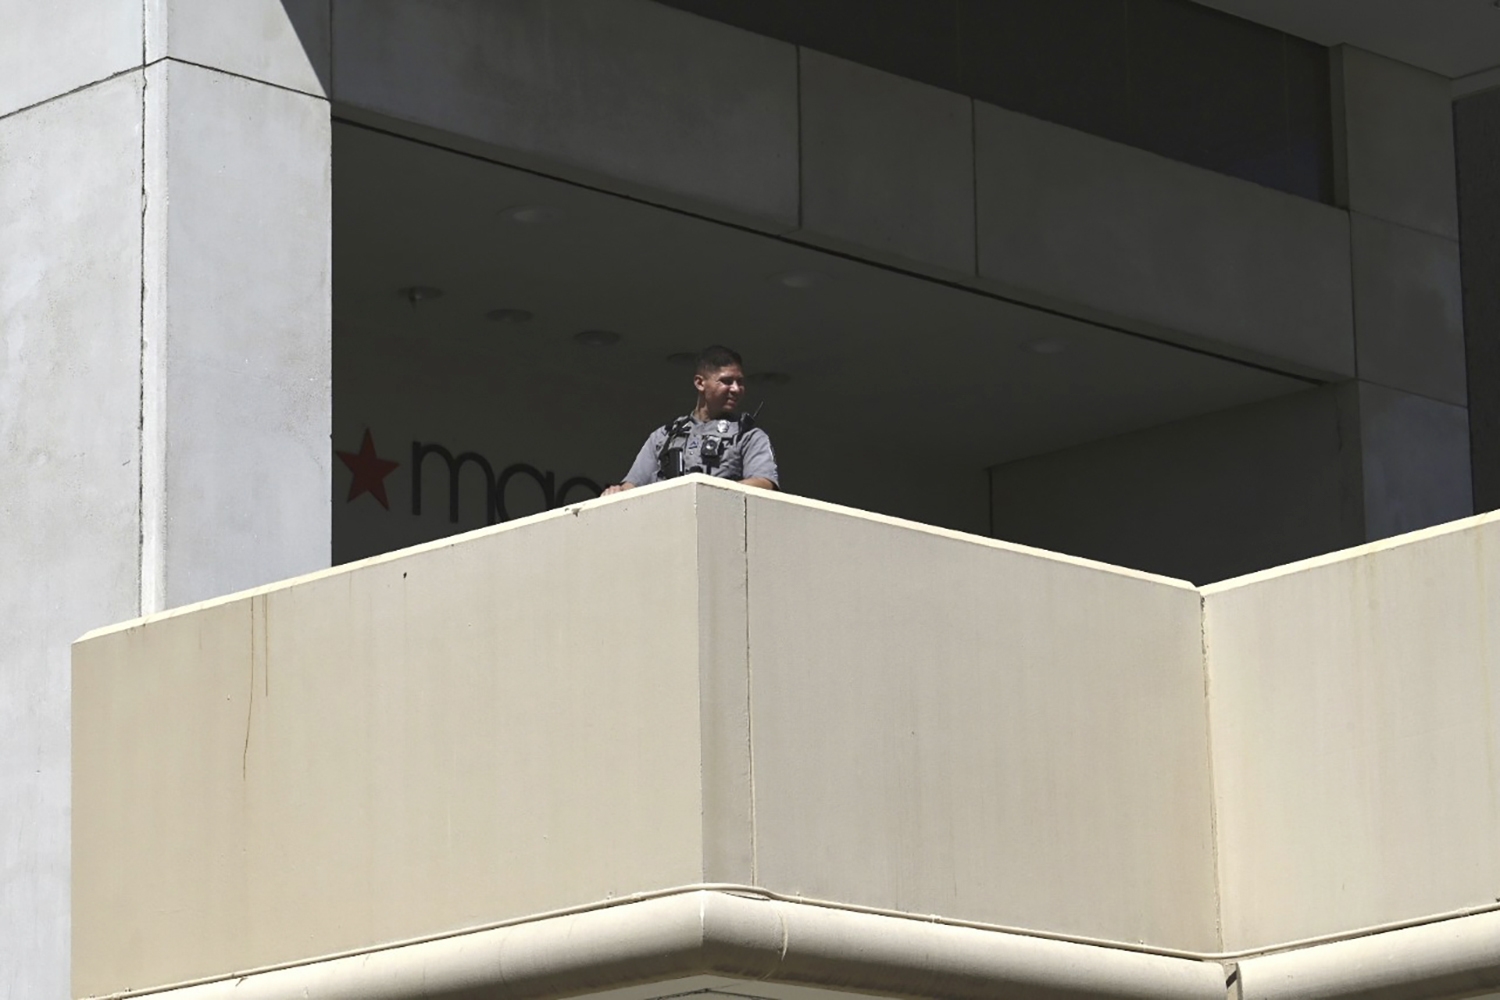 Police stand outside a Macys department store at Tysons Corner Mall in Tysons Corner, Va., on Saturday, June 18, 2022. A gun was fired when a fight broke out at the northern Virginia mall on Saturday, but no injuries were reported and there was no active shooter situation, police said. (Craig Hudson/The Washington Post via AP)